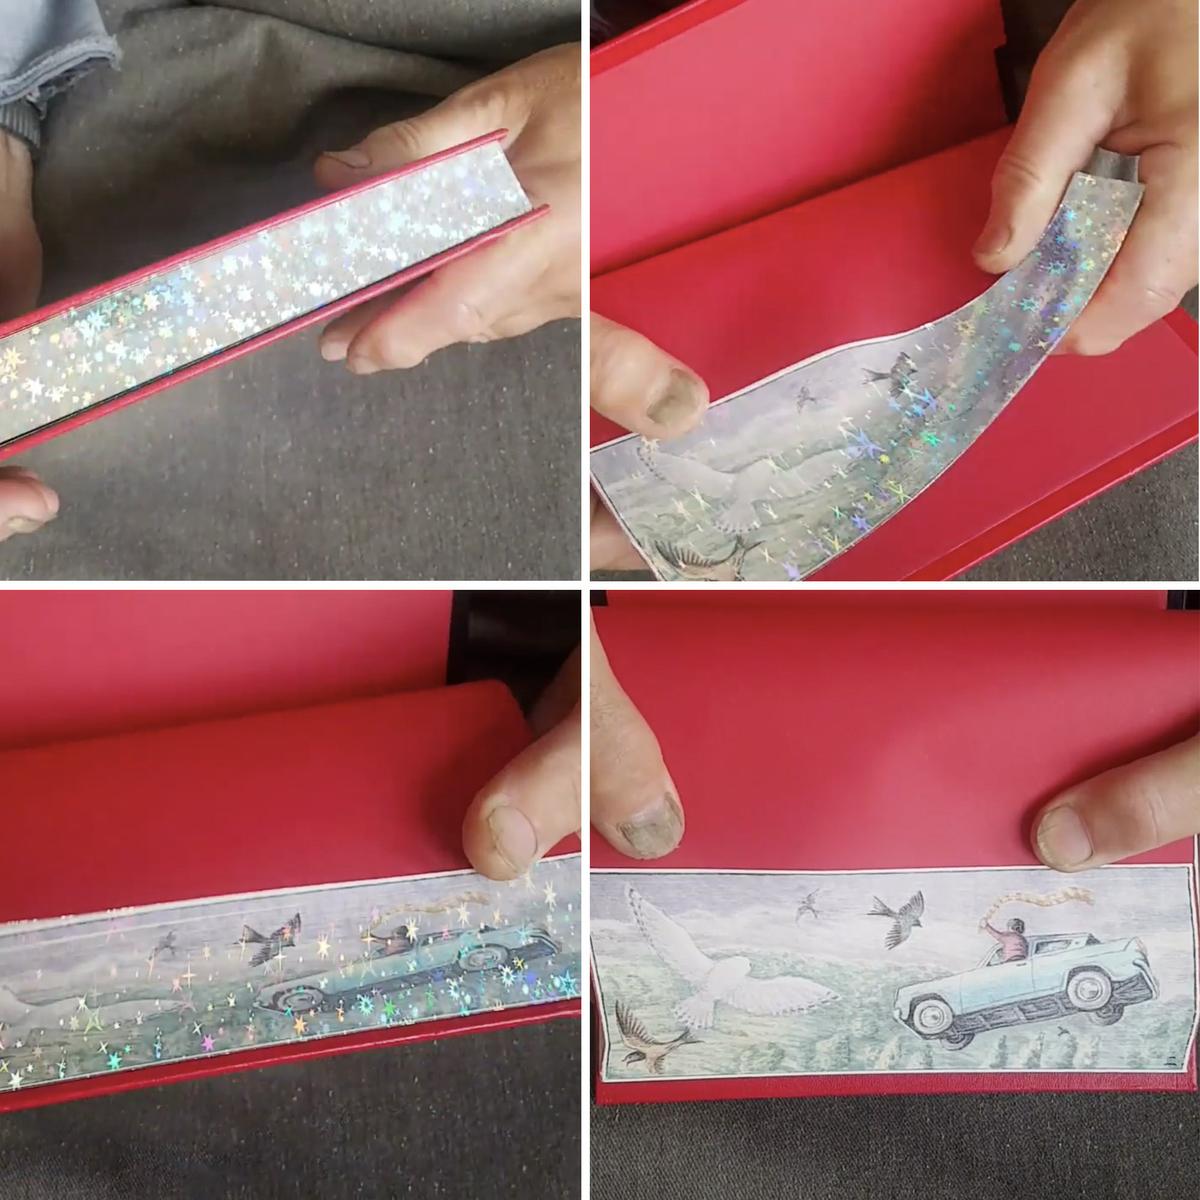 Fore-edge paintings appear like magic when the pages are held just right. (Courtesy of <a href="https://www.foredgefrost.co.uk/">Martin Frost</a> <a href="https://www.instagram.com/foredgefrost1/">@foredgefrost1</a>)